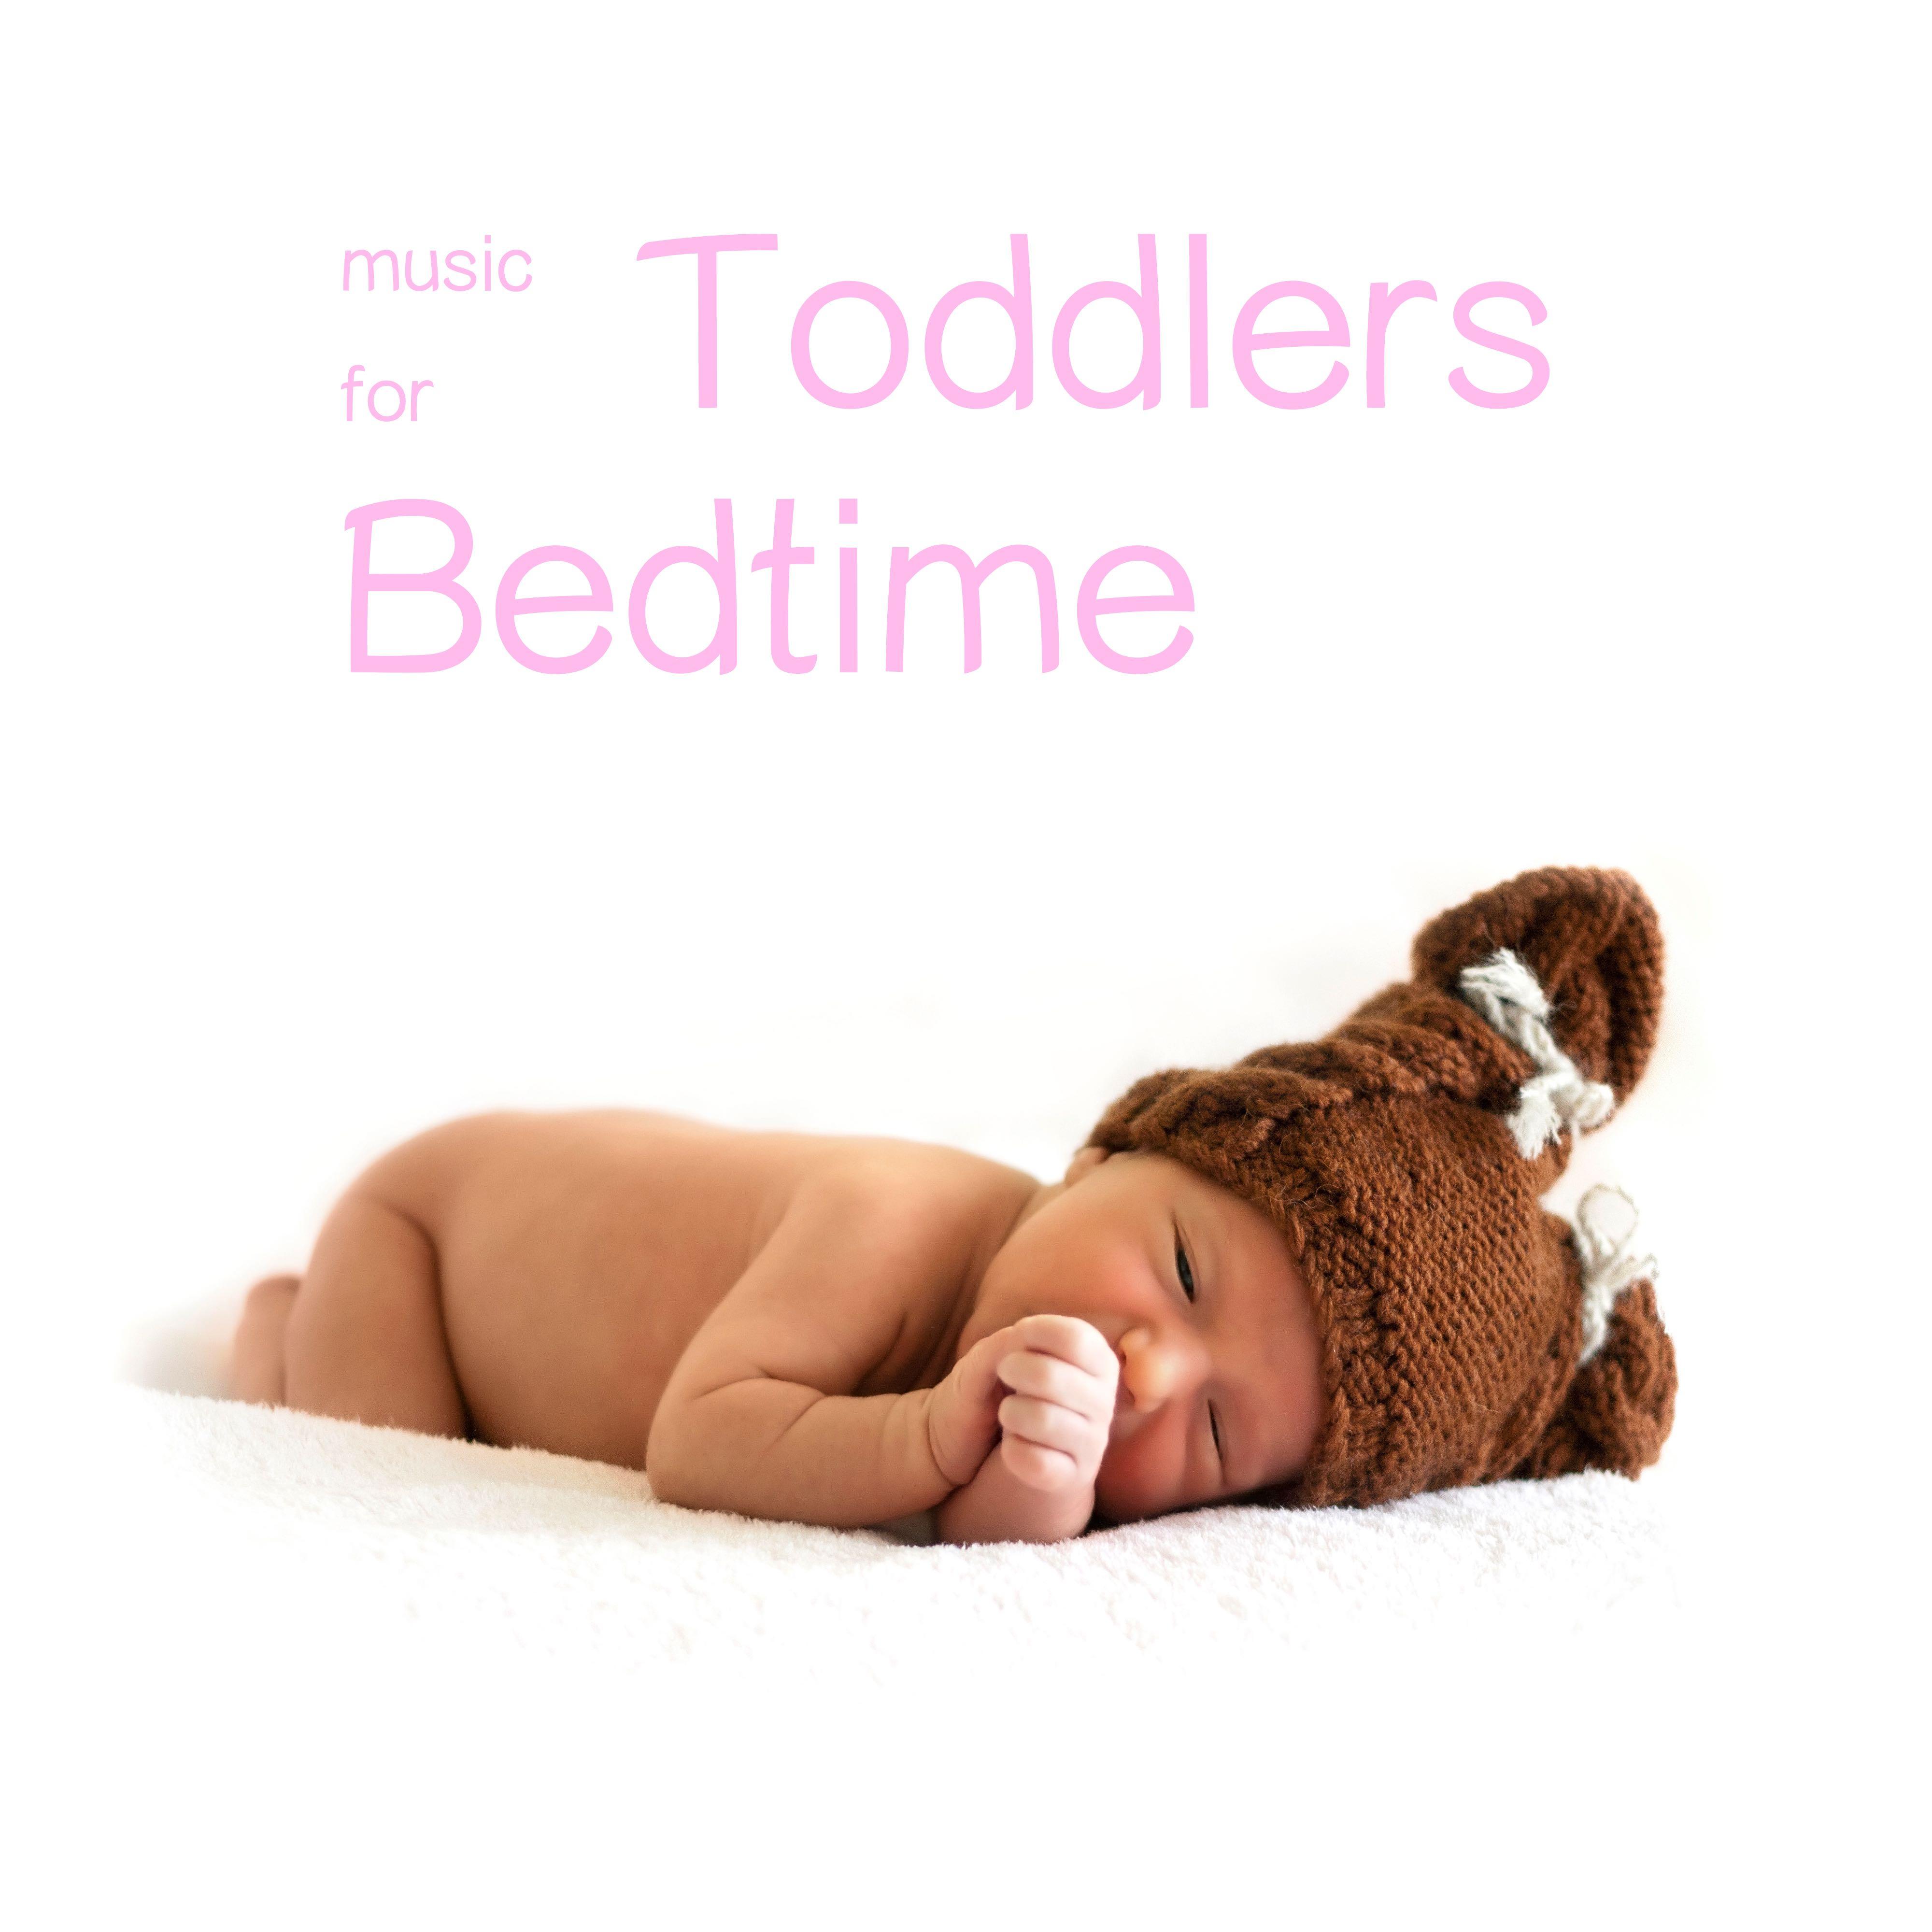 Music for Toddlers Bedtime - Lullabies and Calming Songs for Baby Sleep